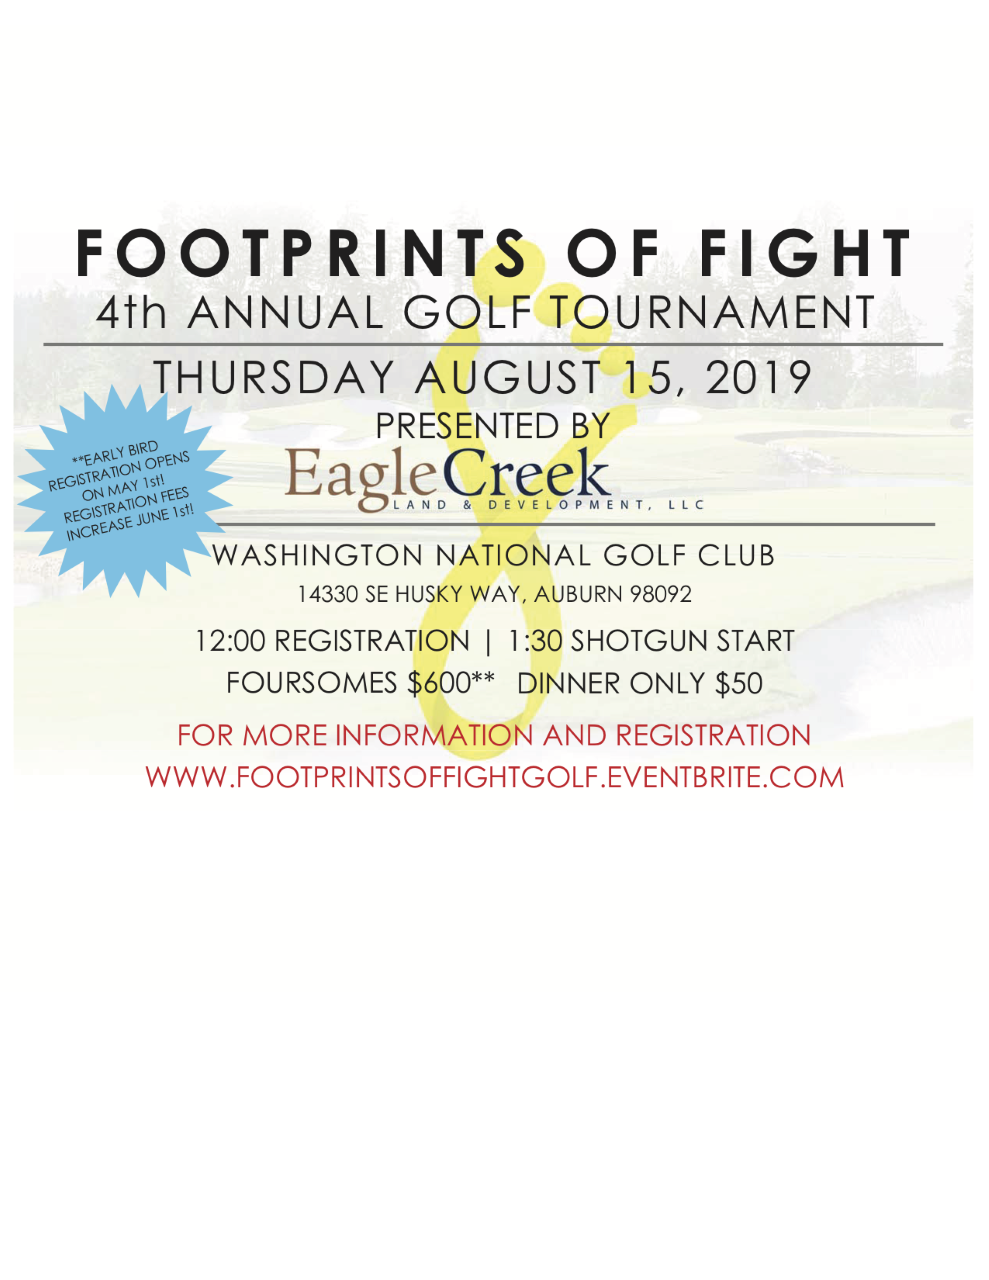 Footprints of Fight 4th Annual Golf Tournament